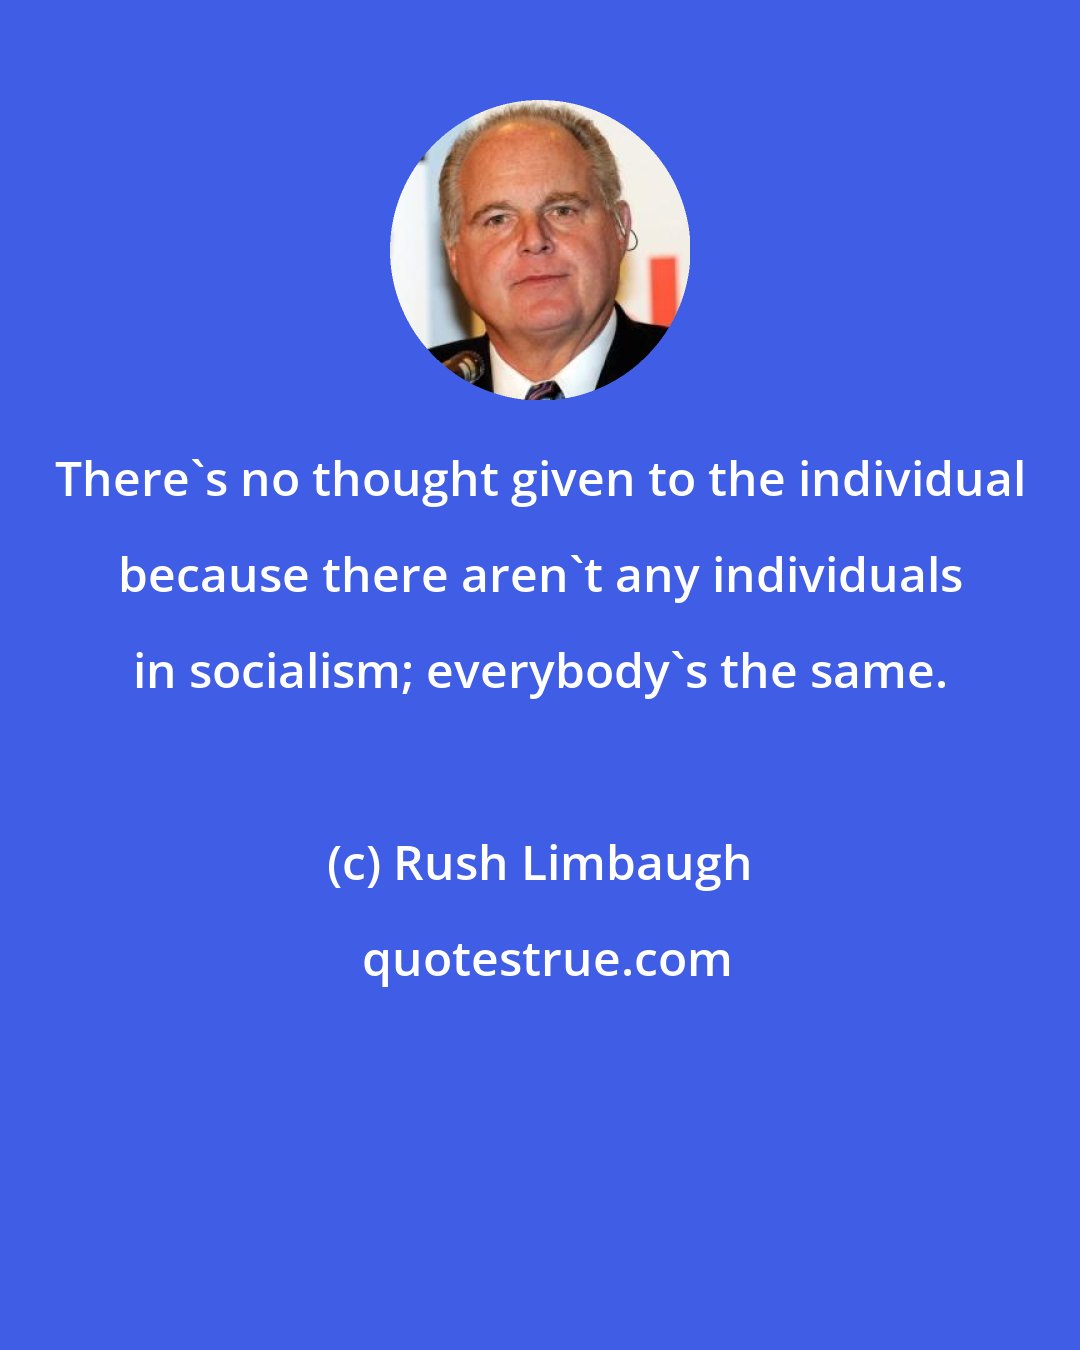 Rush Limbaugh: There's no thought given to the individual because there aren't any individuals in socialism; everybody's the same.